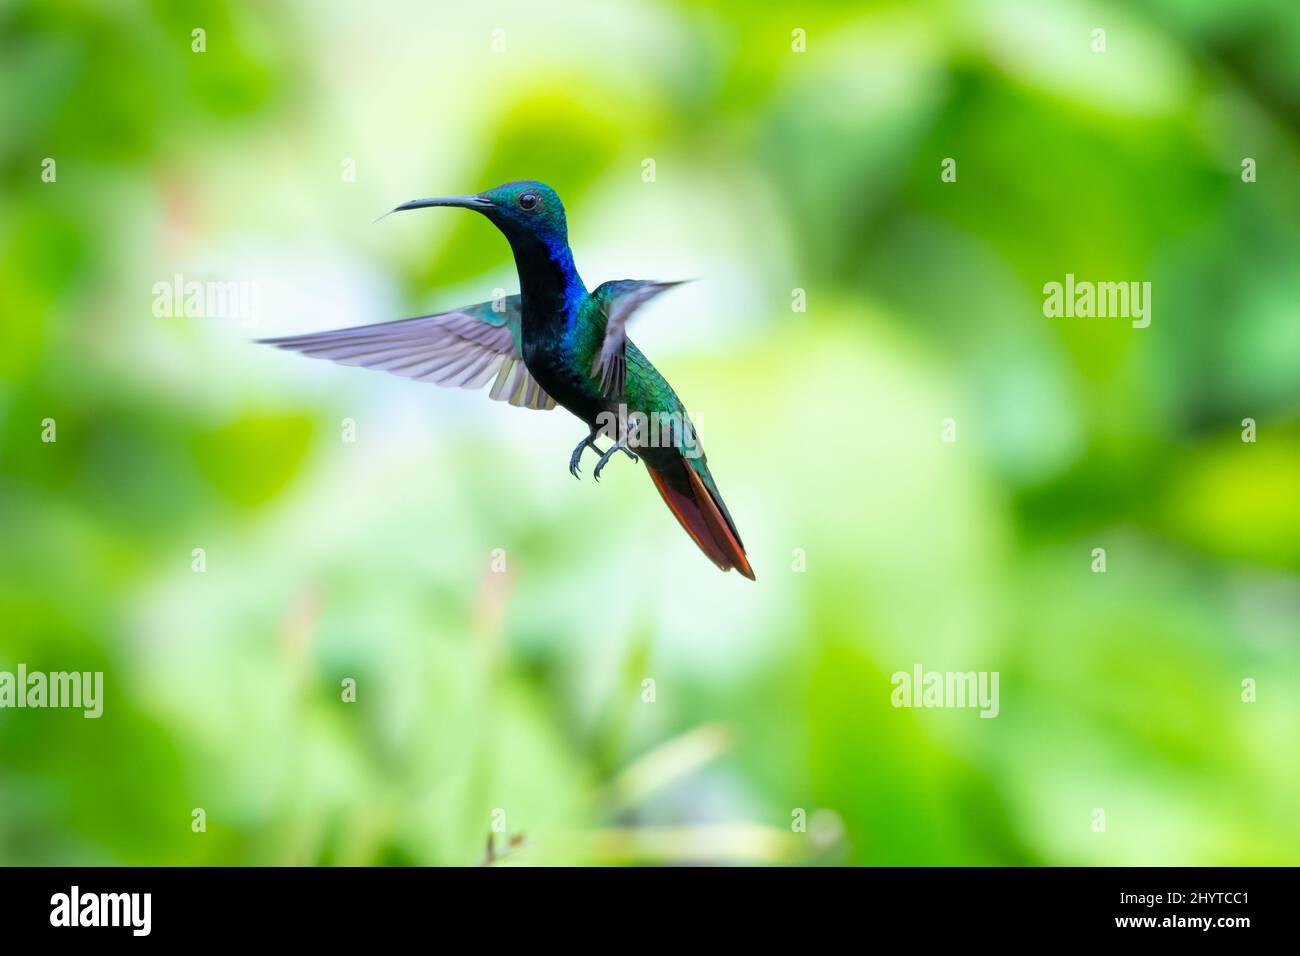 Colorful male Black-throated Mango hummingbird, Anthracothorax nigricollis, in a beautiful pose in flight with wings spread. Stock Photo